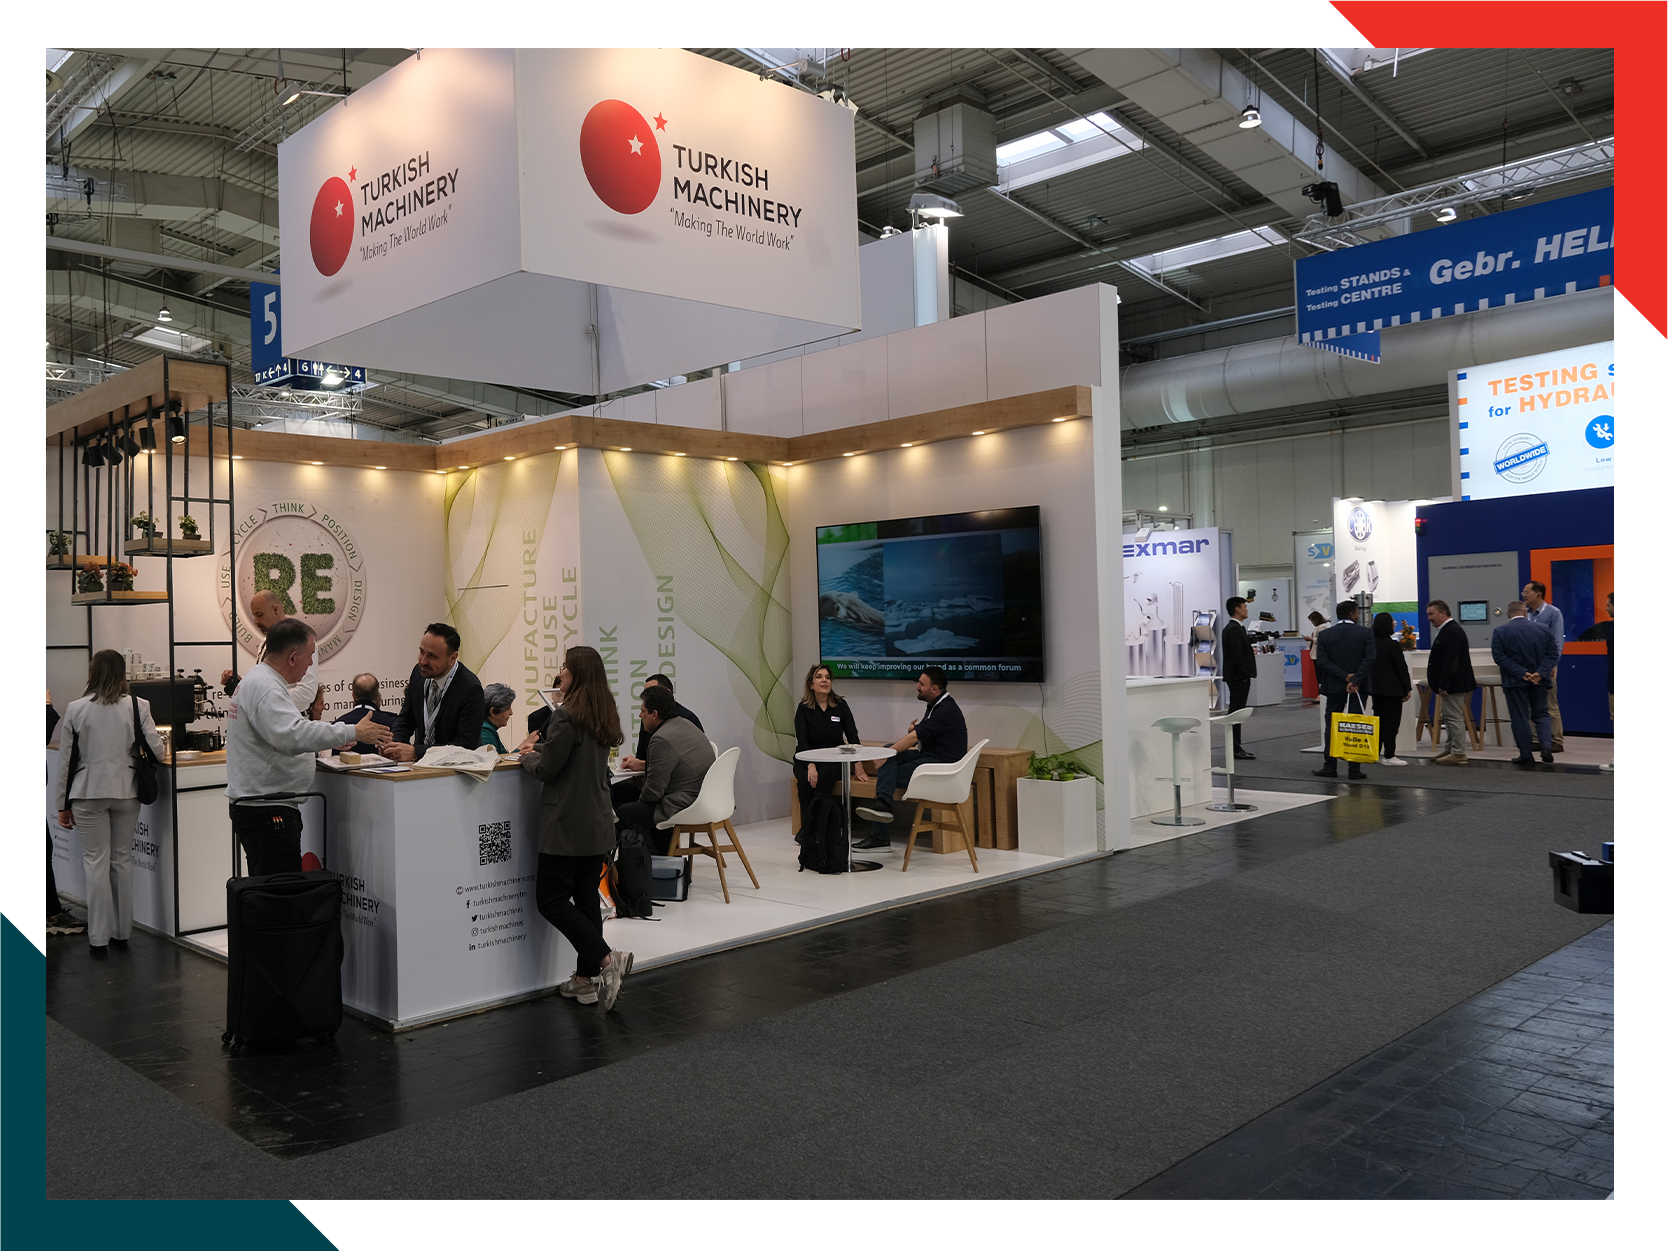 Turkish Machinery Has Participated in Hannover Messe Industry Fair